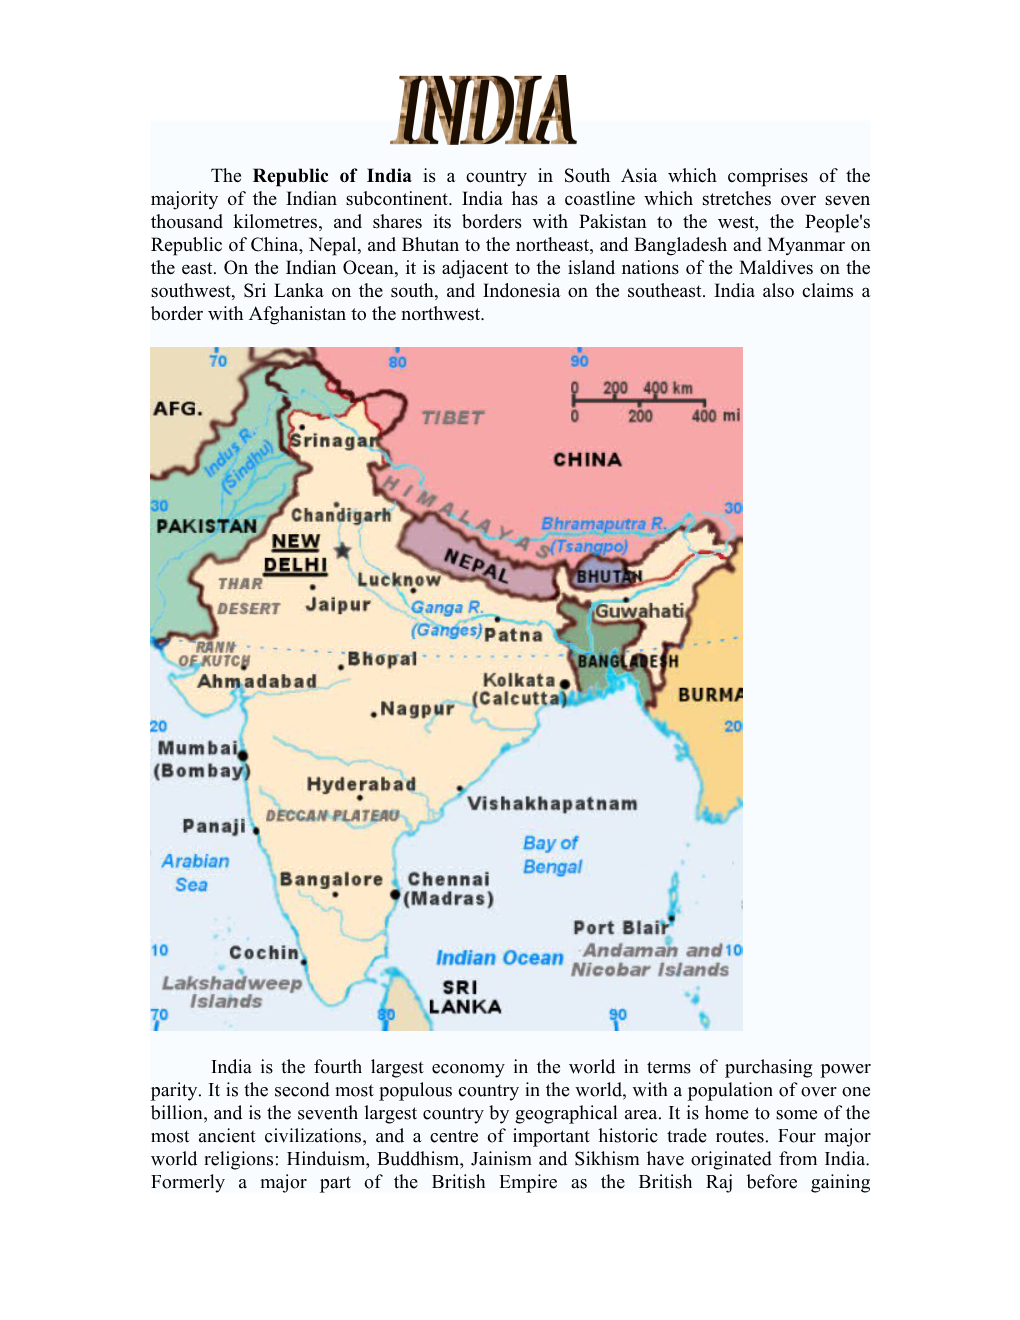 The Republic of India Is a Country in South Asia Which Comprises of the Majority of The